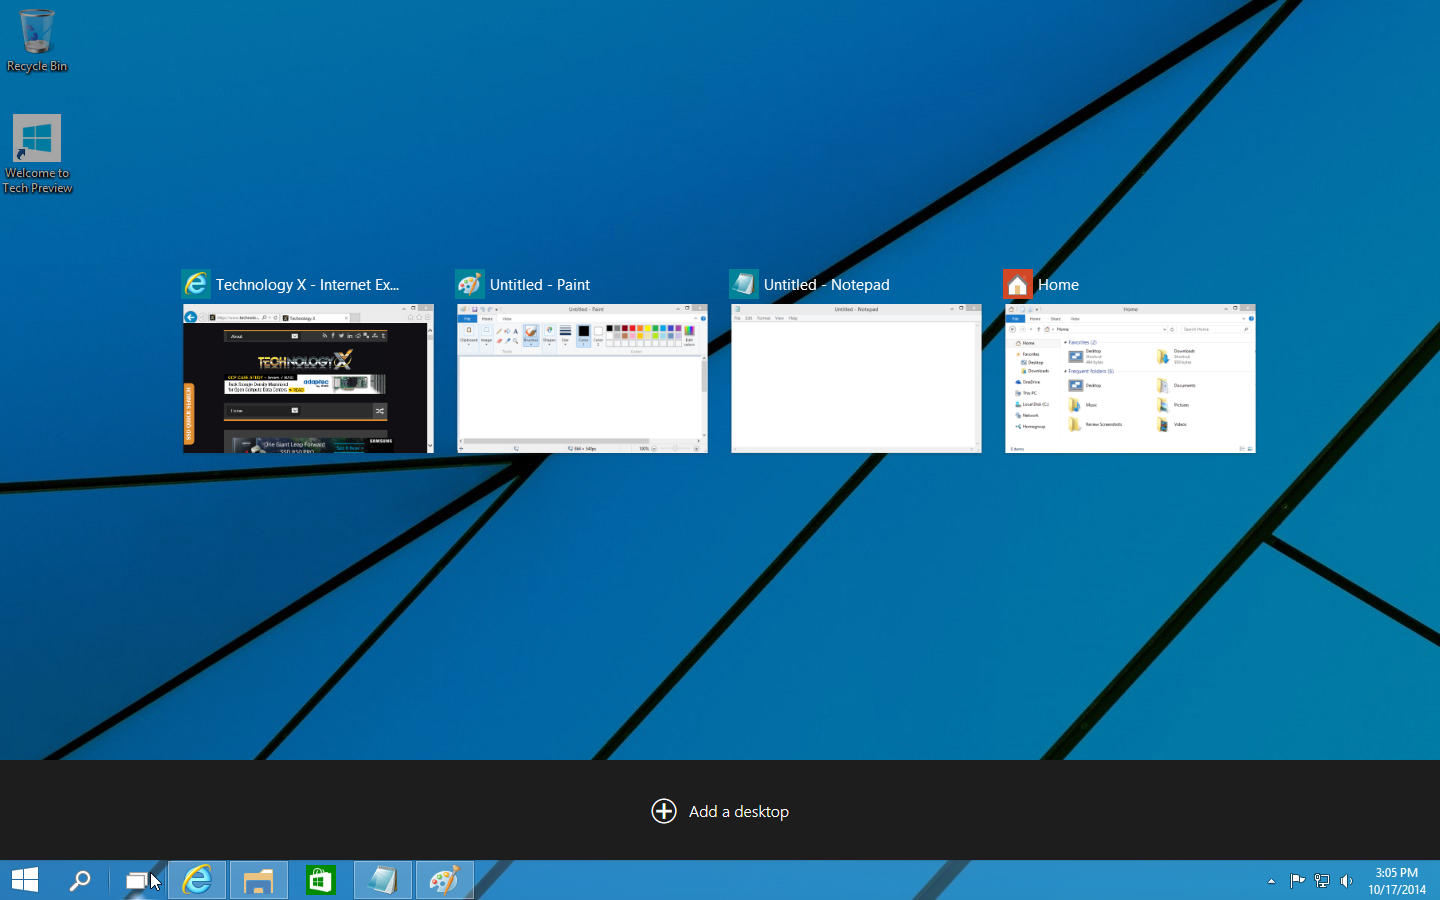 Windows 10 Preview Hands-on - Microsoft Makes Big Steps Forward